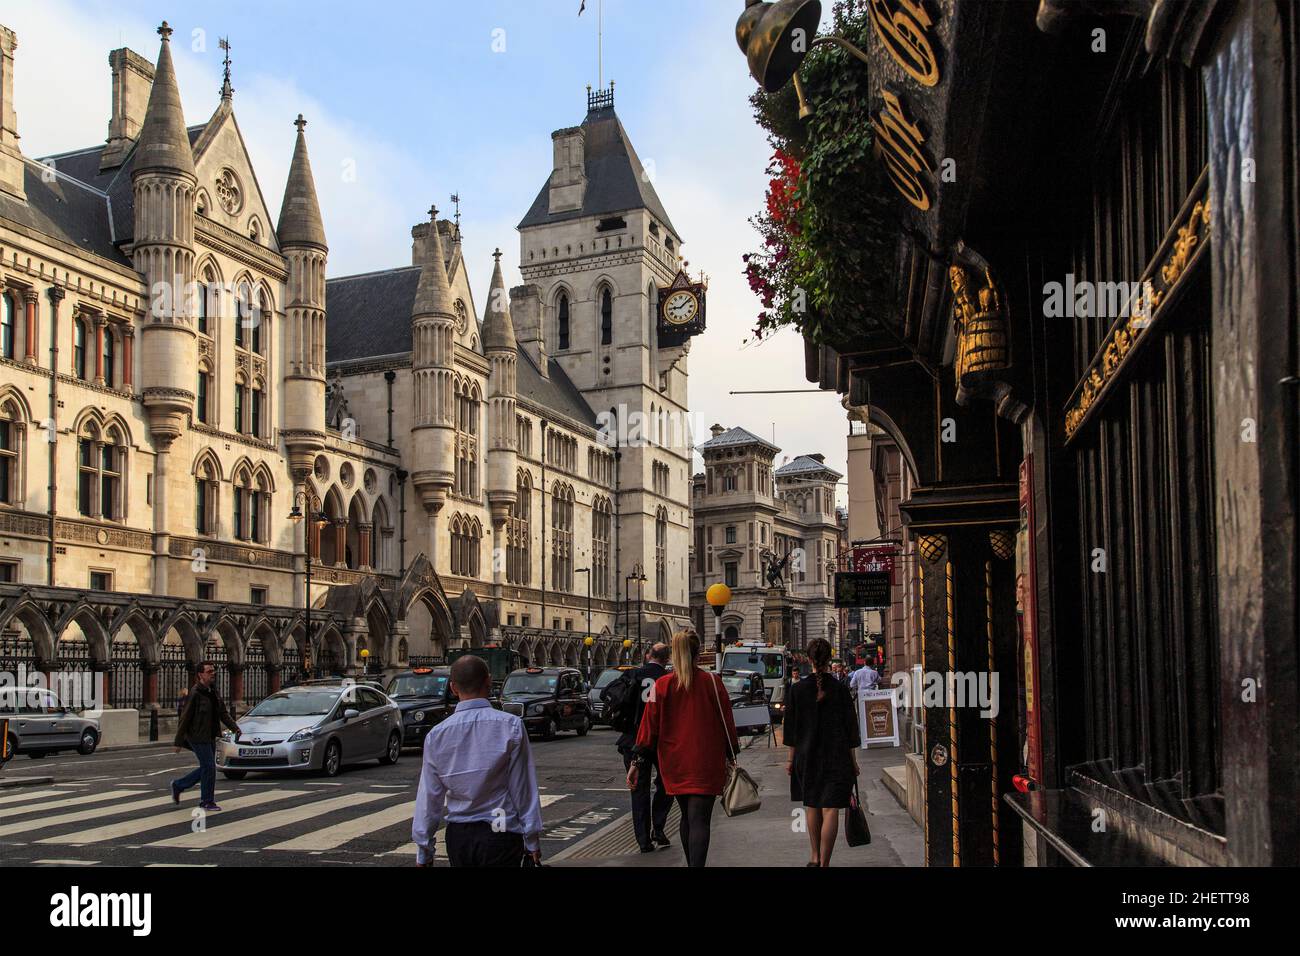 LONDON, GREAT BRITAIN - SEPTEMBER 19, 2014: The Royal Court of London is a monumental complex of neo-Gothic buildings on Strand Street in the city cen Stock Photo